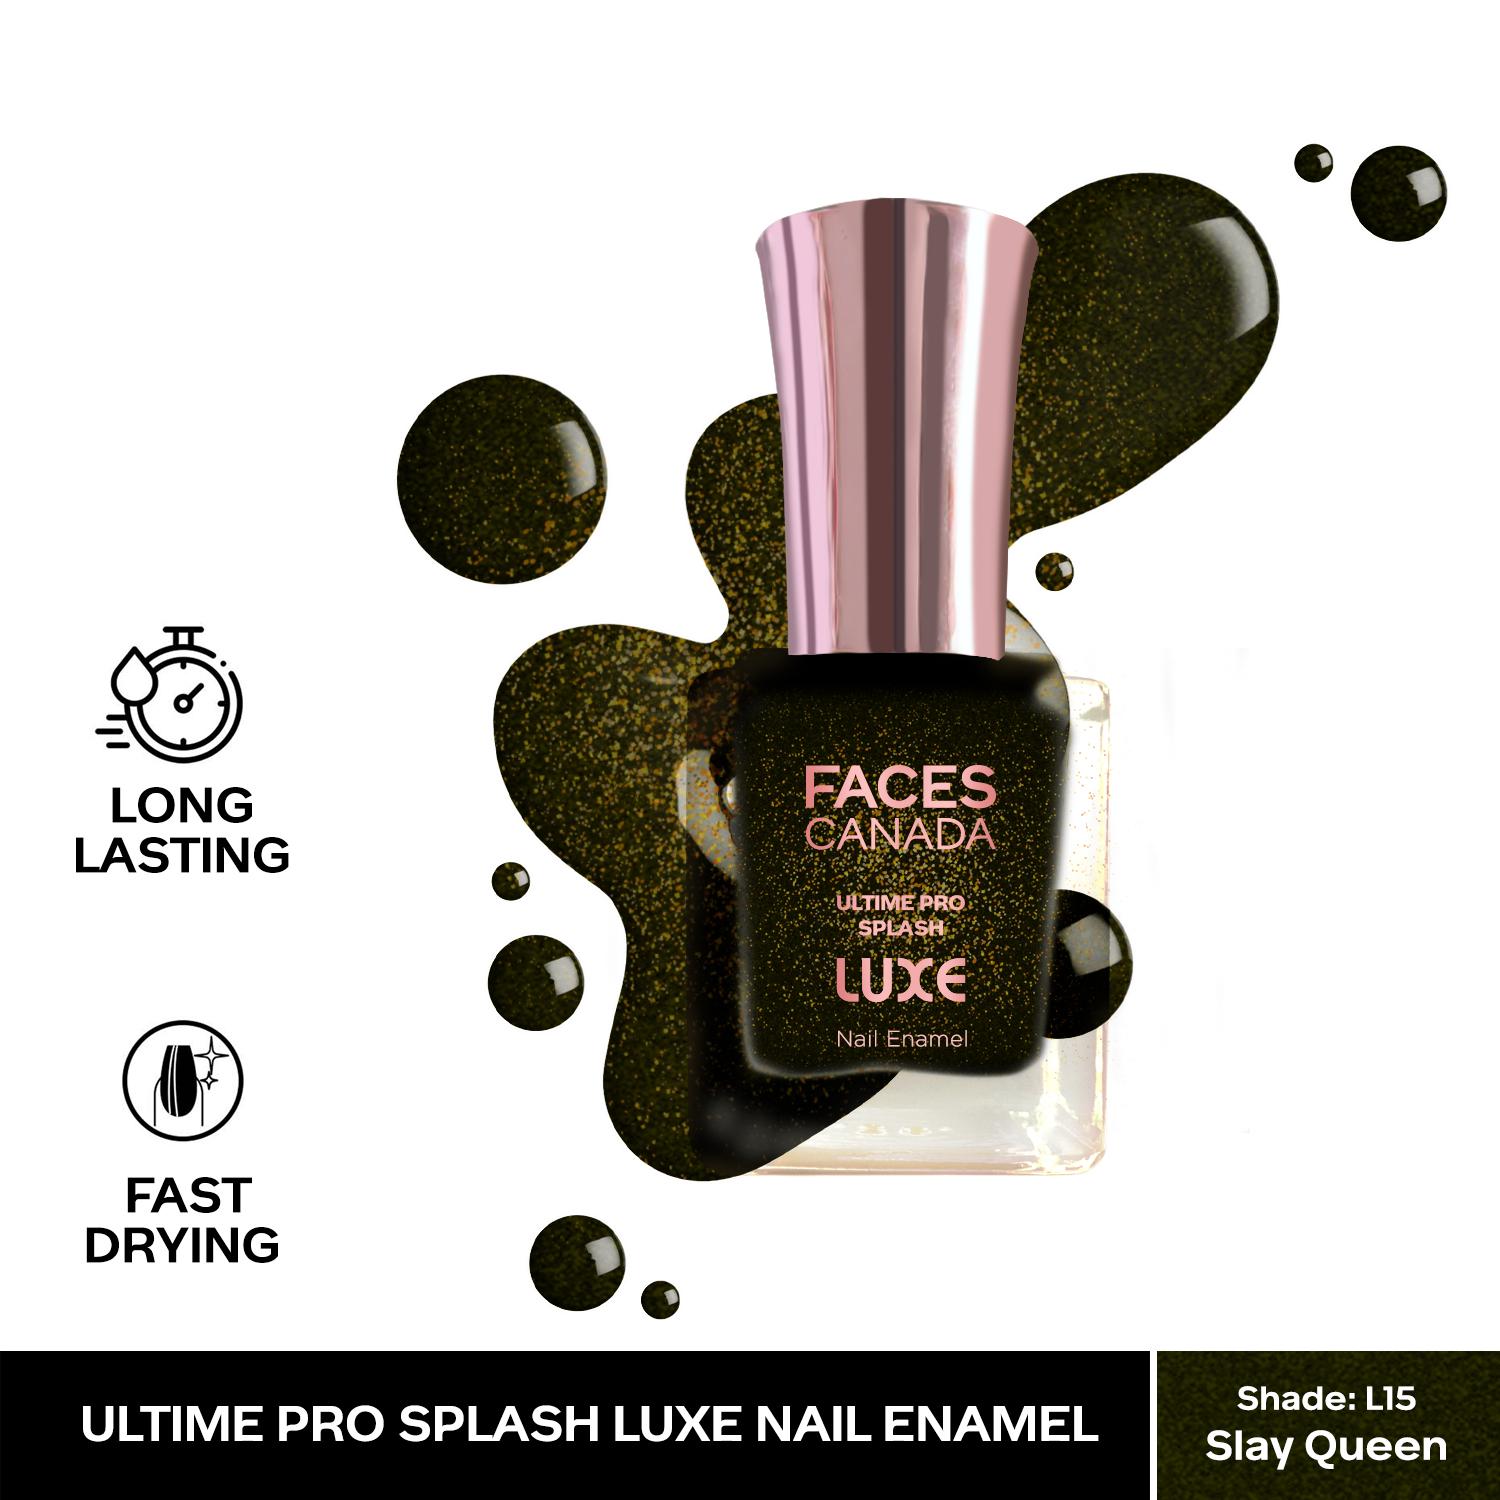 Faces Canada | Faces Canada Ultime Pro Splash Luxe Nail Enamel - Slay Queen (L15), Glossy Finish (12 ml)